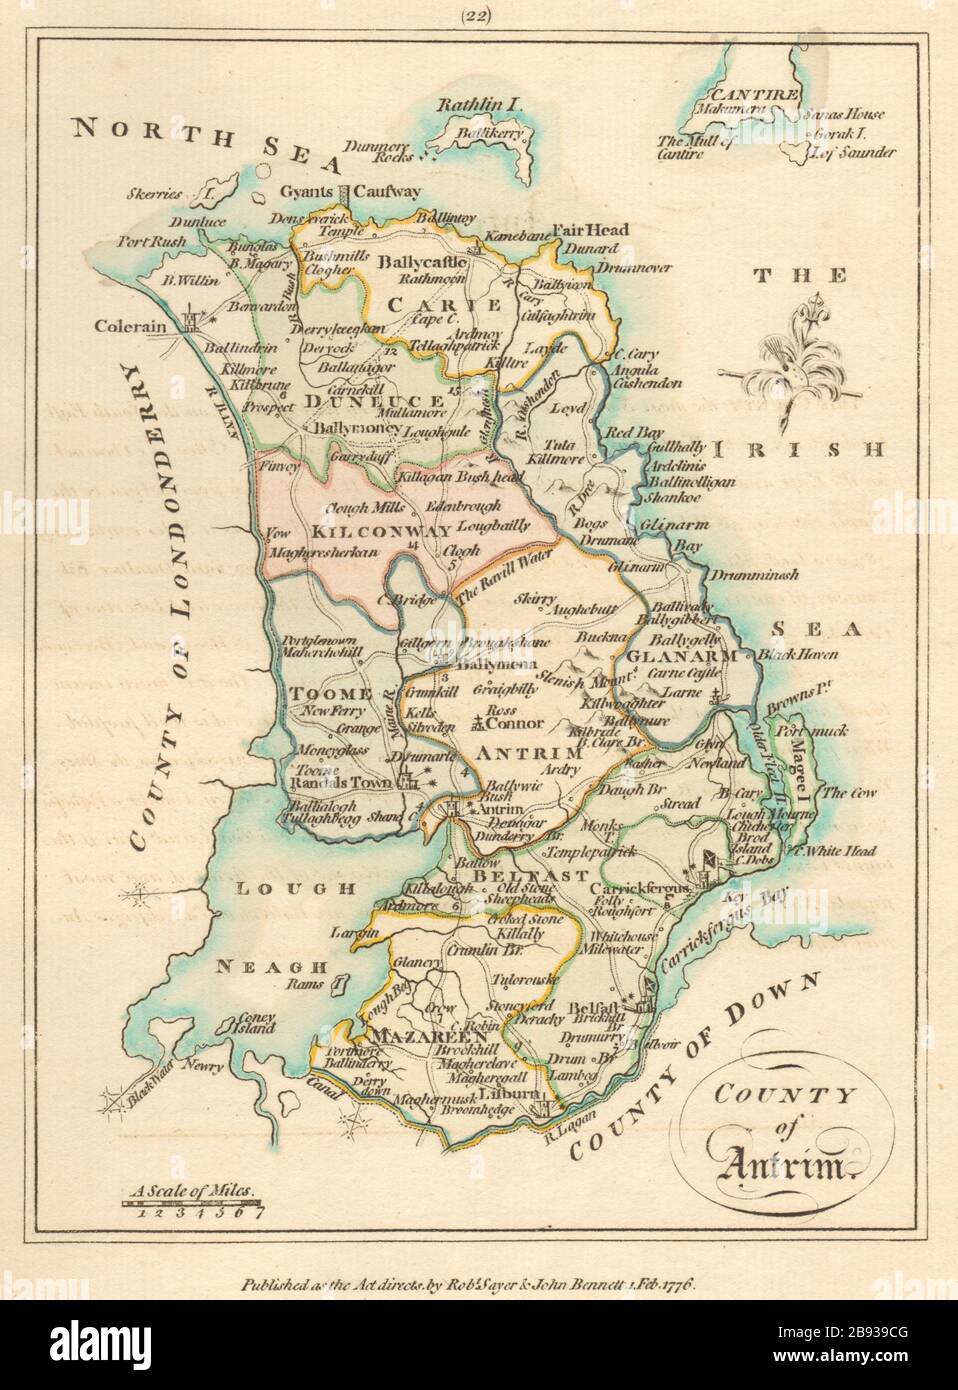 County of Antrim, Ulster. Antique copperplate map by Scalé / Sayer 1776 Stock Photo